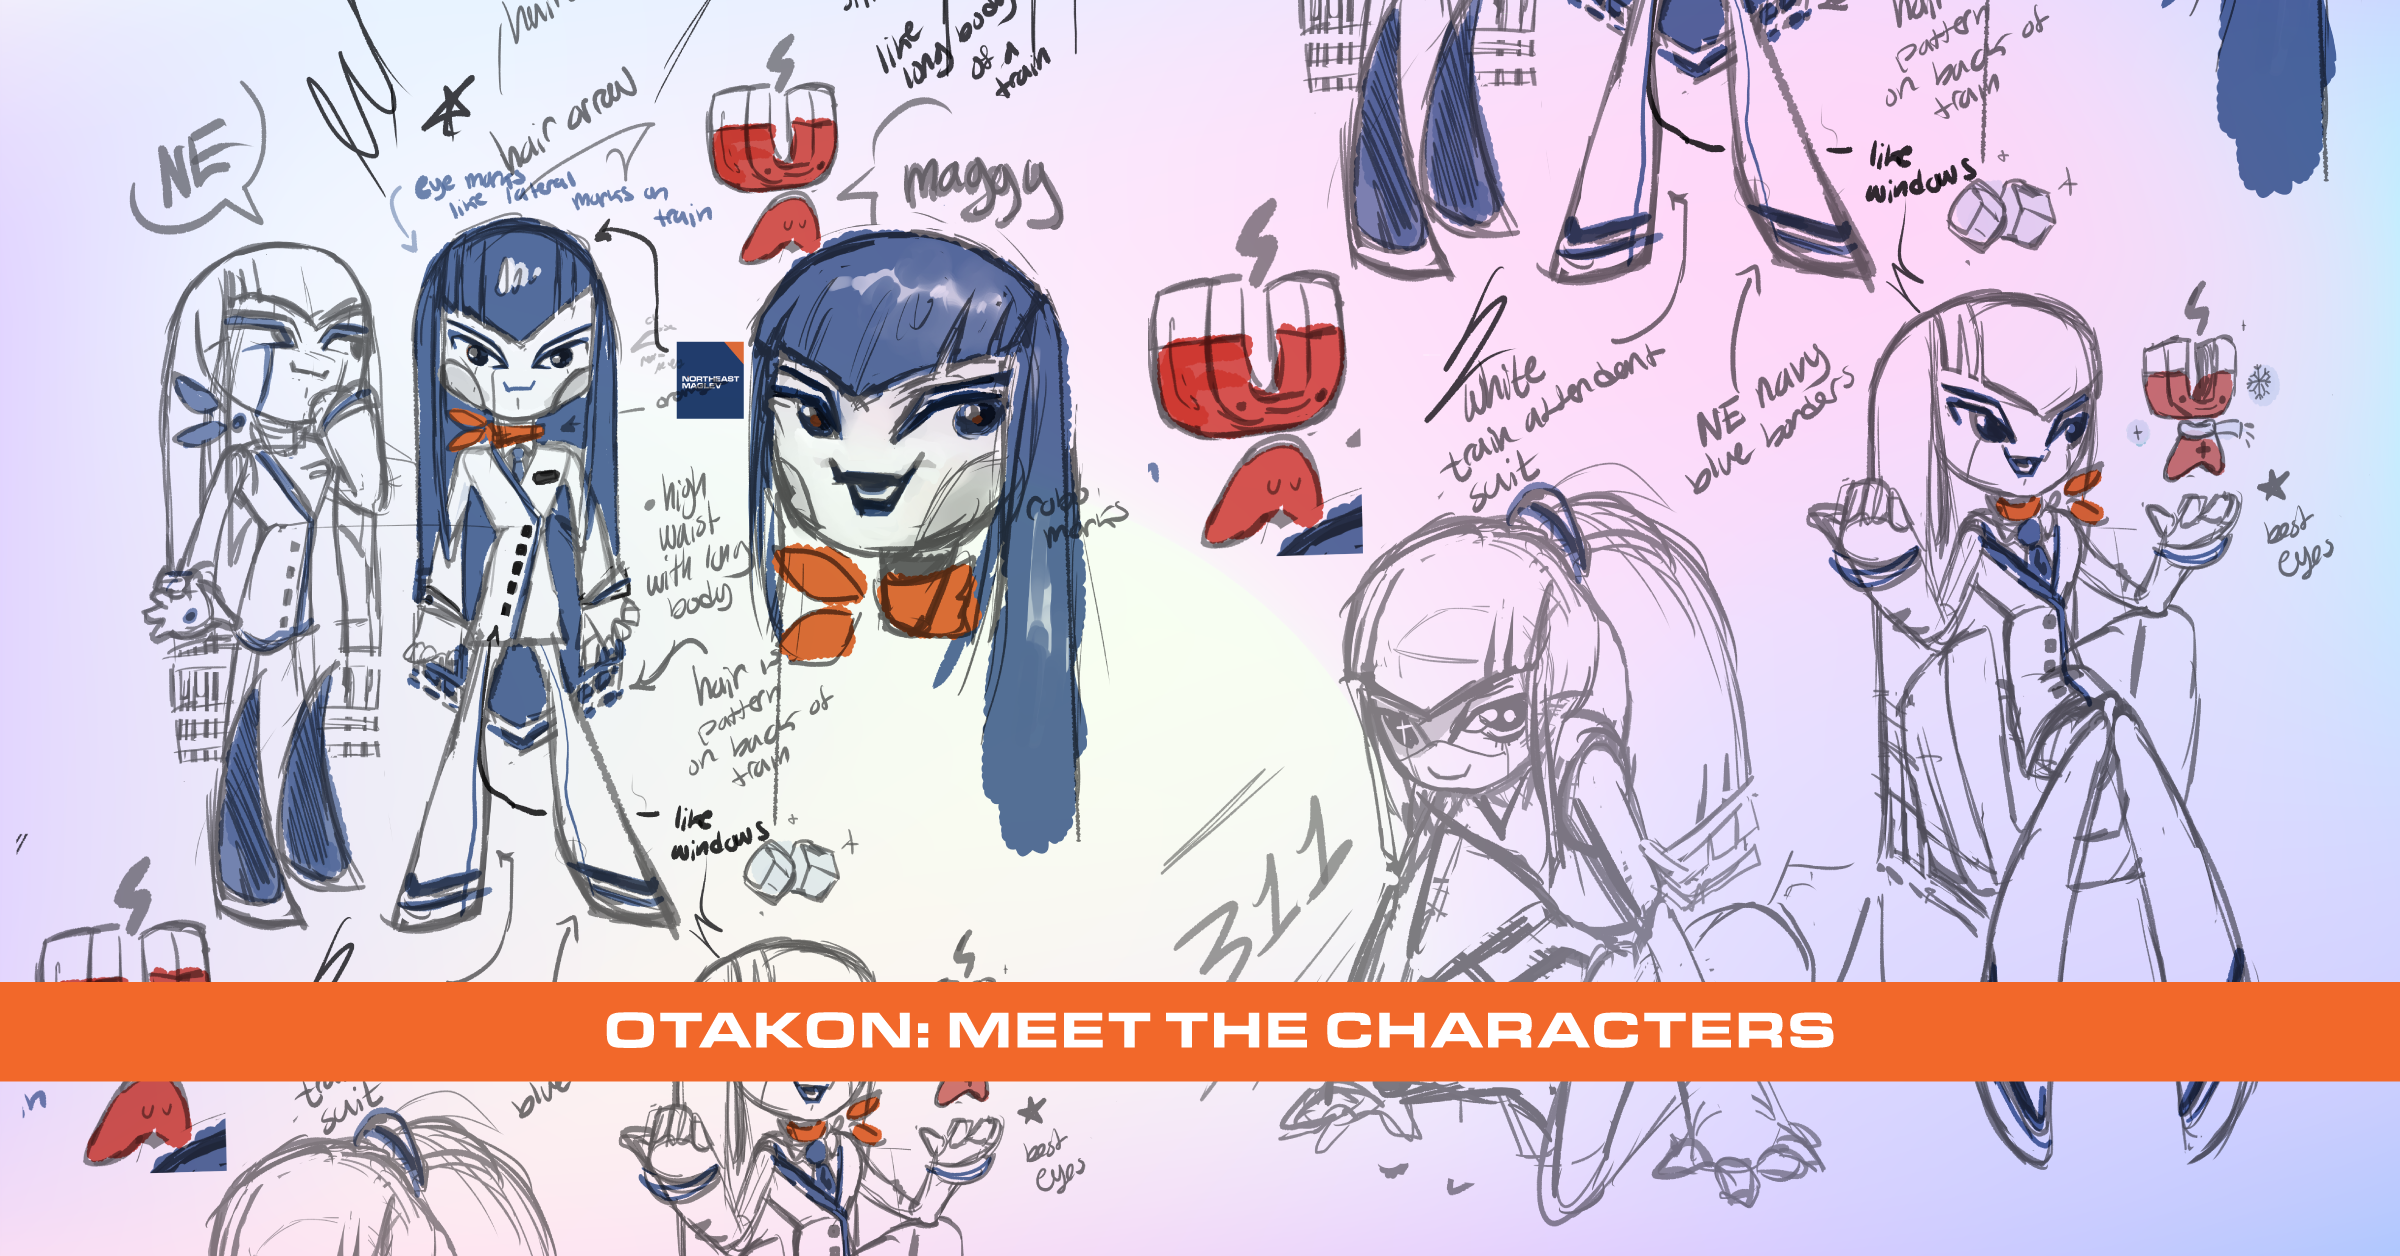 An illustration containing various sketches depicting the evolution of the anthropomorphic characters developed Otakon 2023.